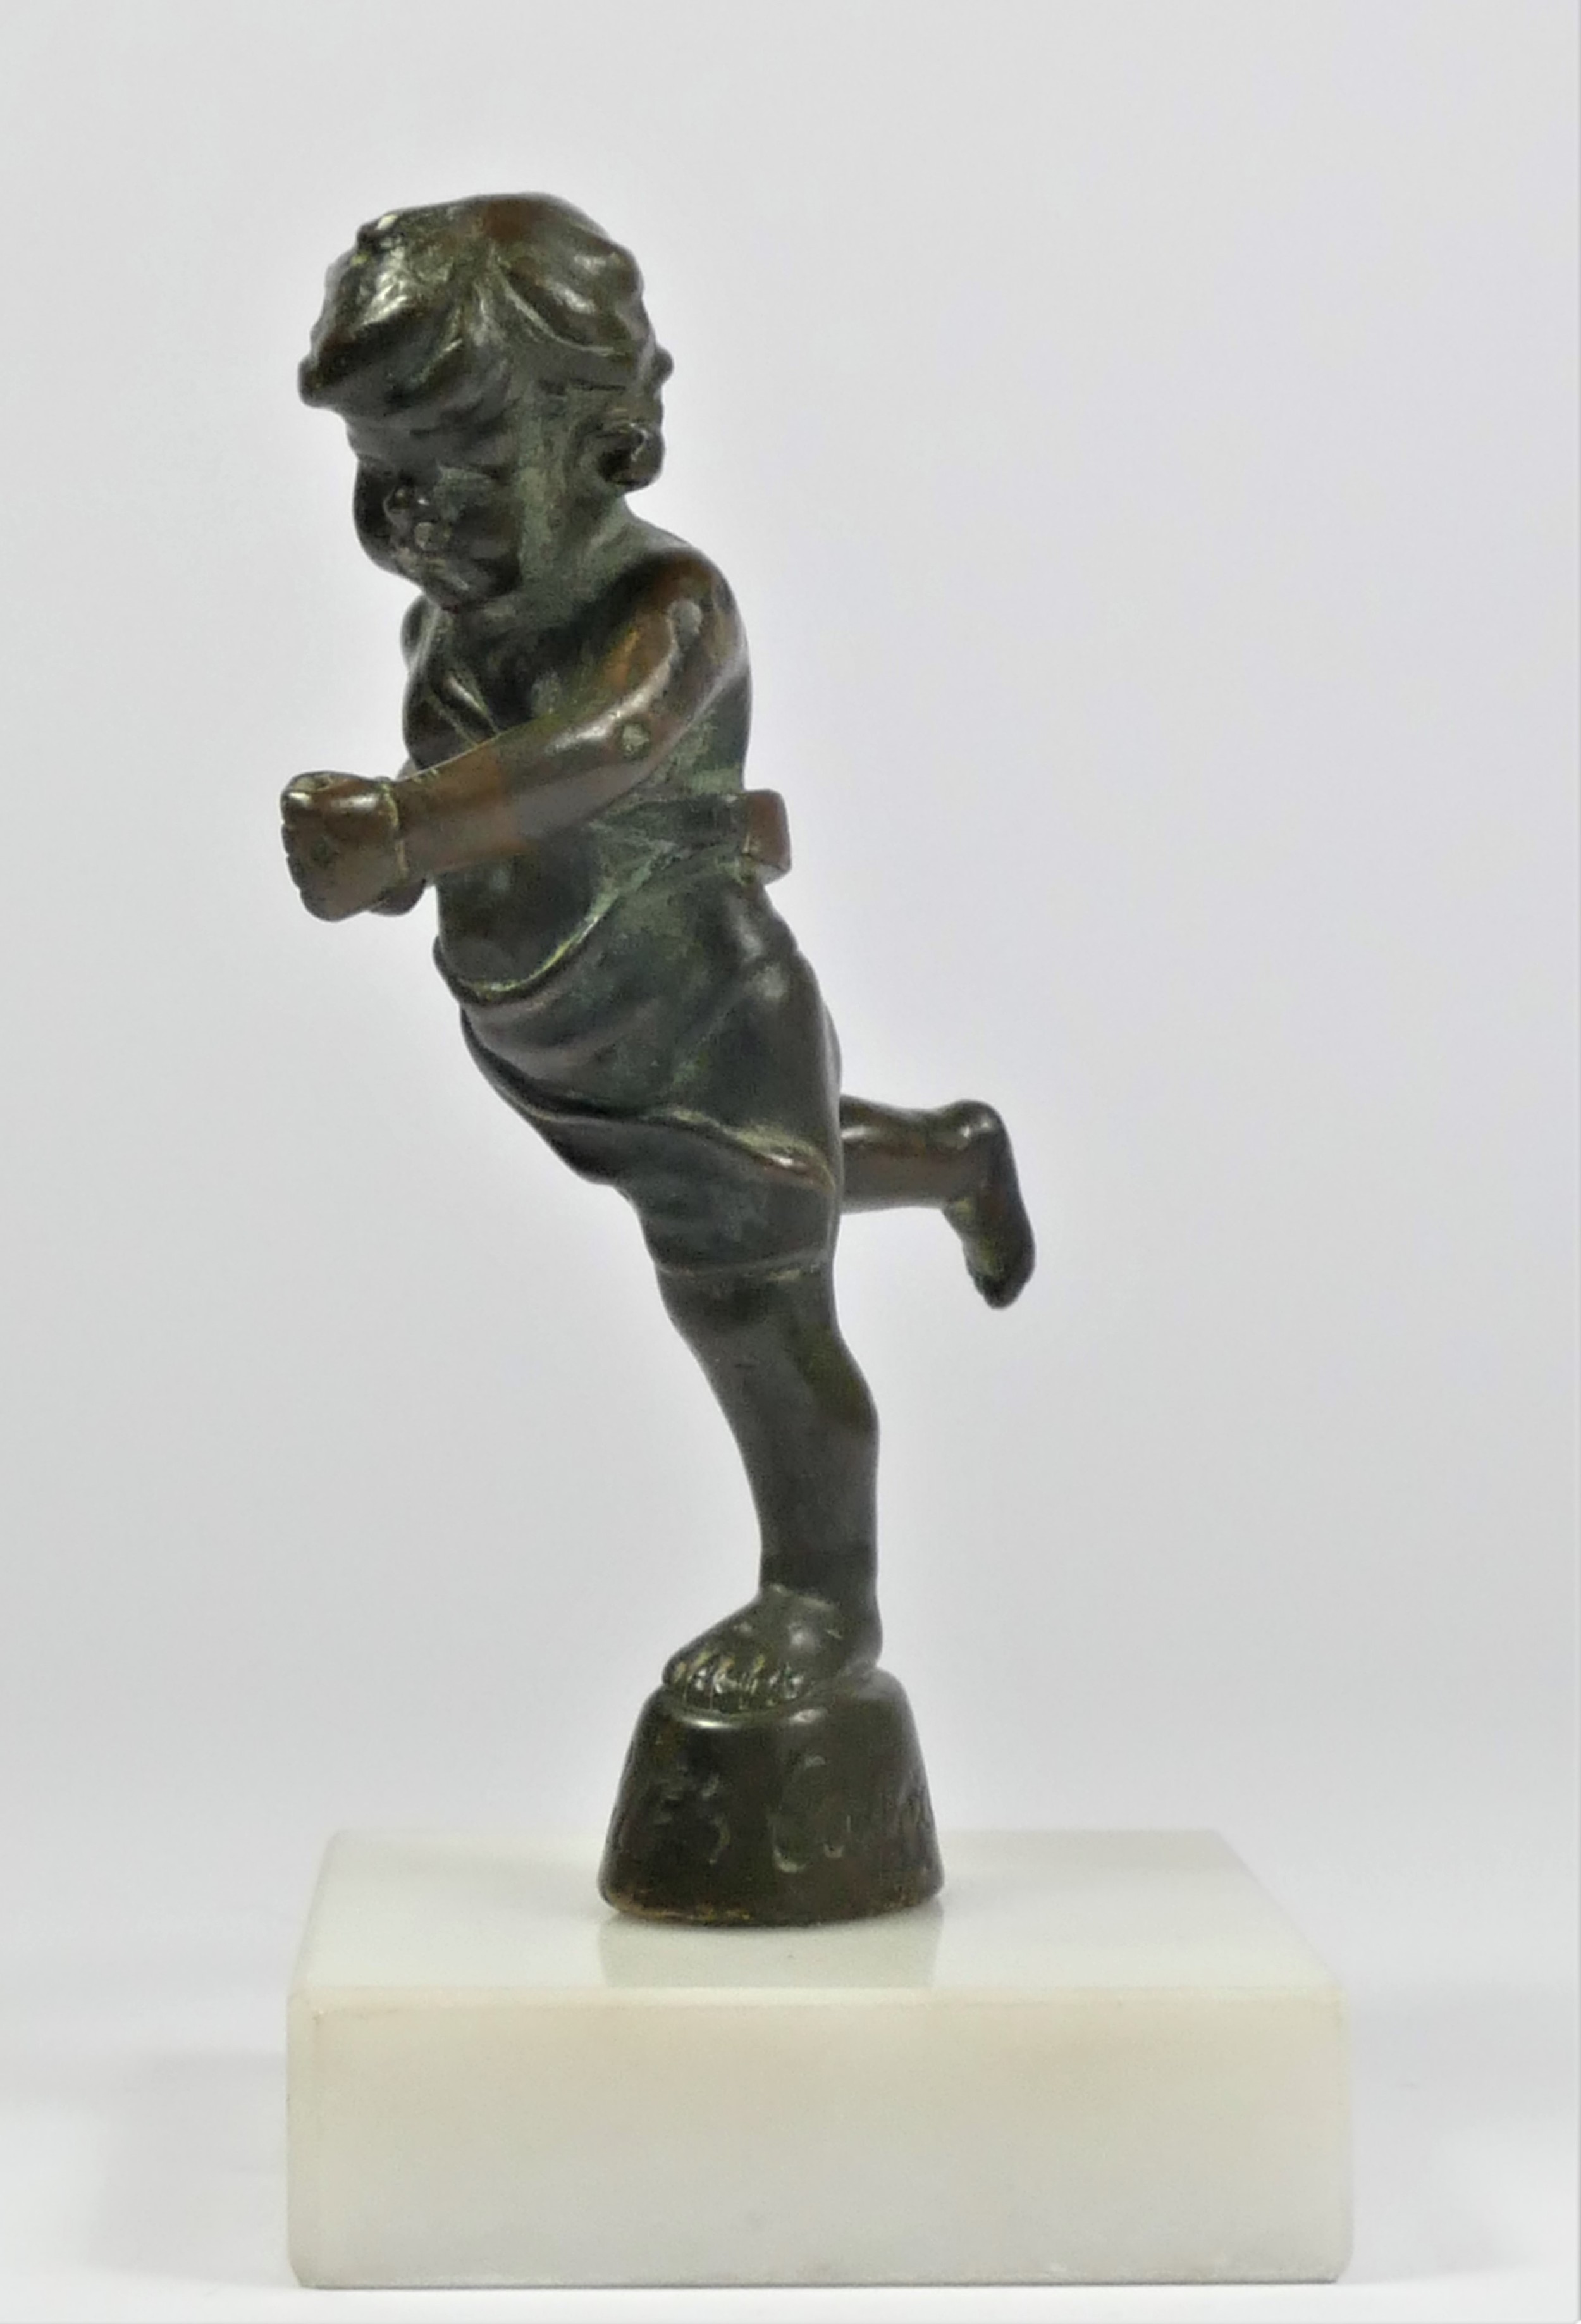 A bronze cherub car mascot signed Cubitt Cupid by Emile Lejeune, mounted on a white marble base, - Image 2 of 4